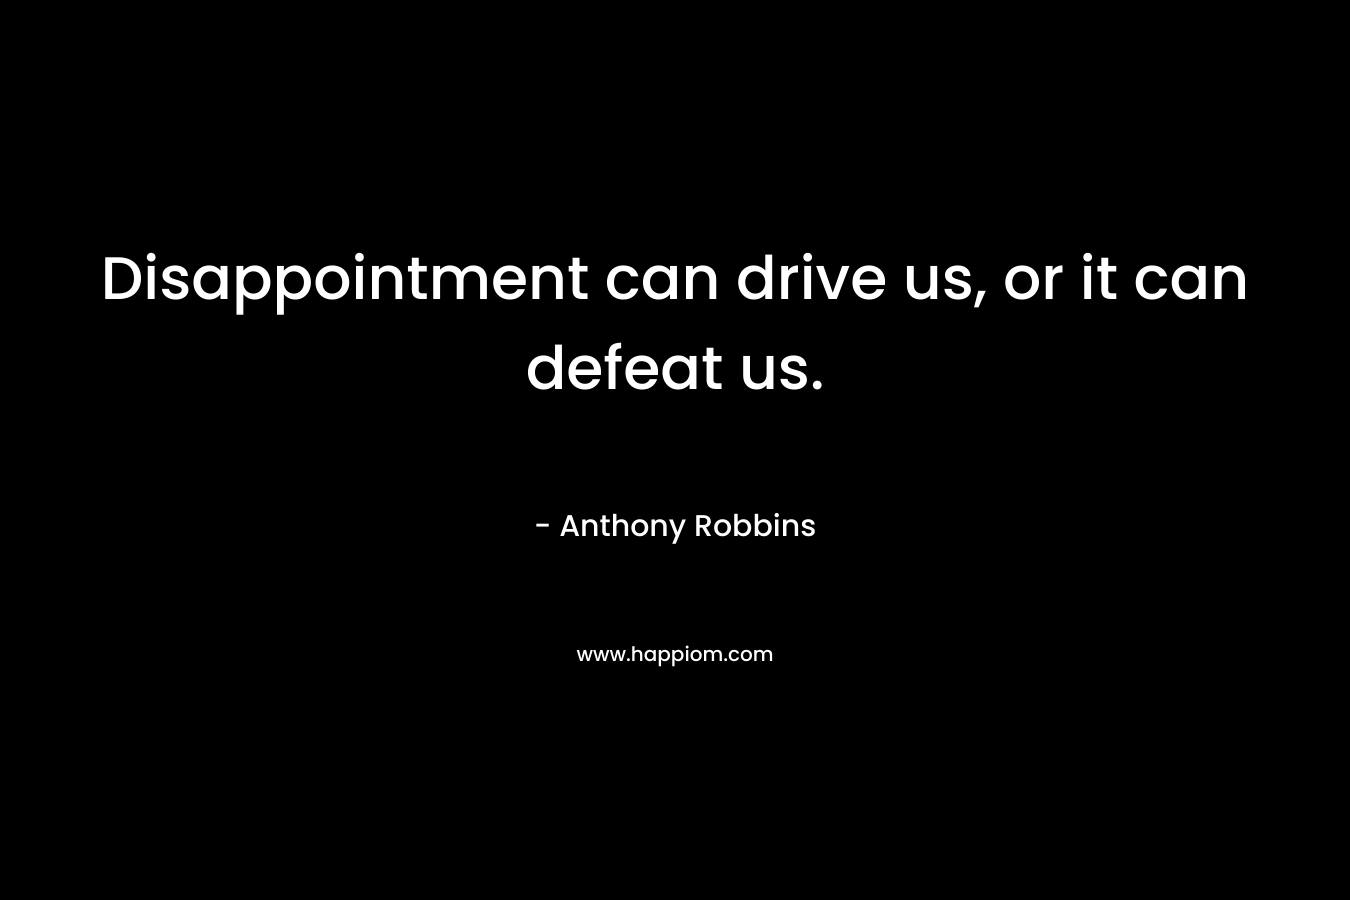 Disappointment can drive us, or it can defeat us.